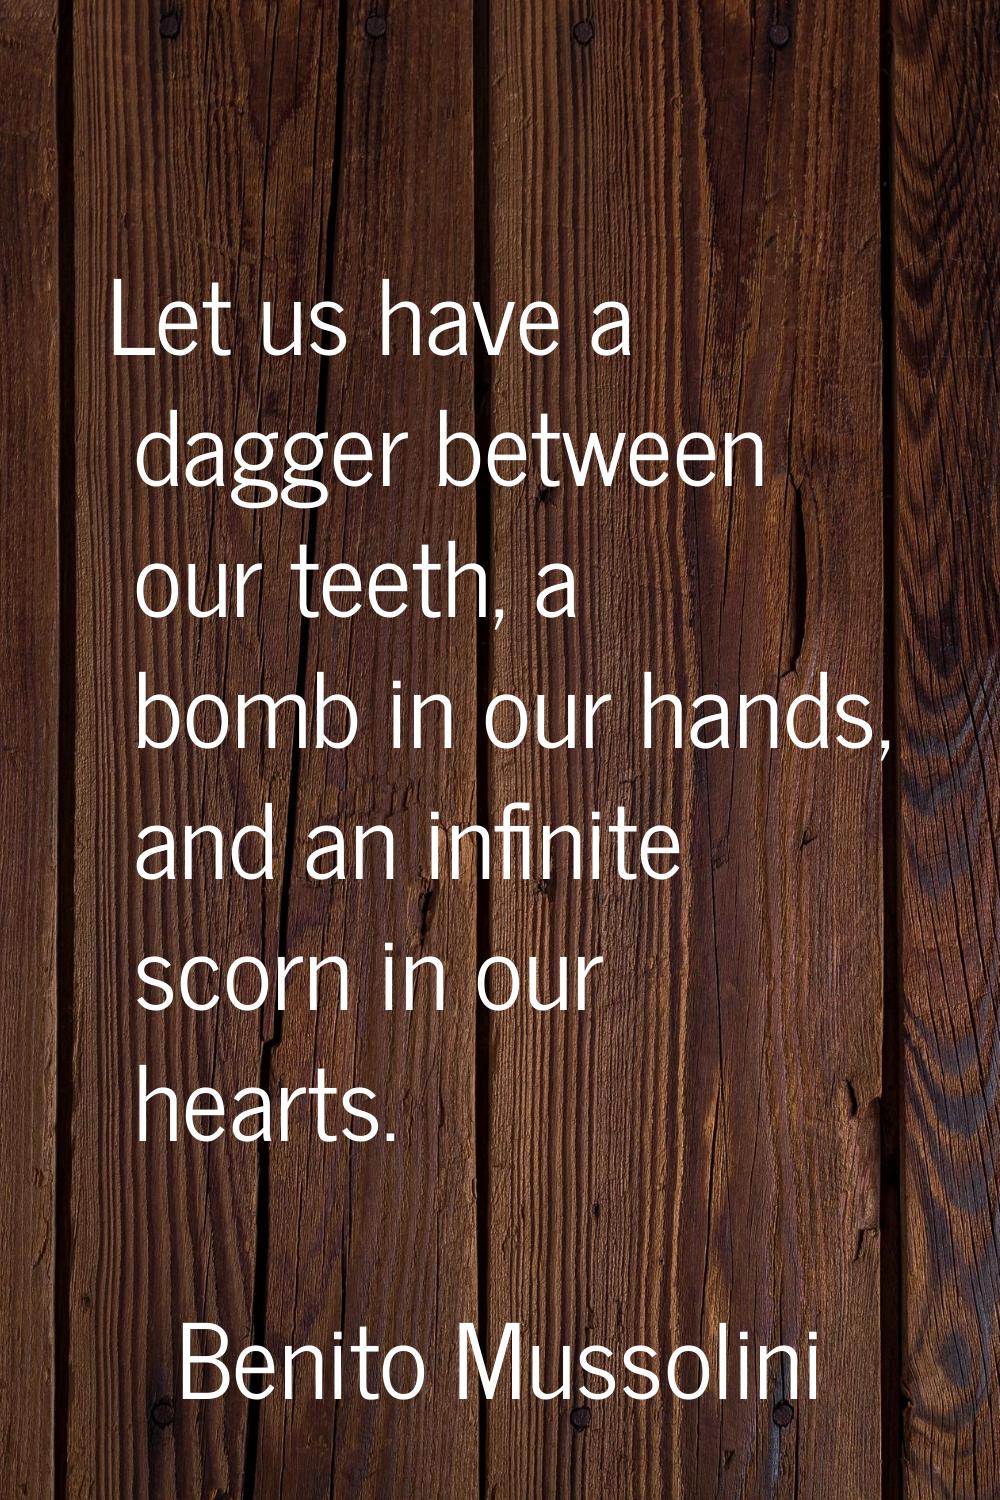 Let us have a dagger between our teeth, a bomb in our hands, and an infinite scorn in our hearts.